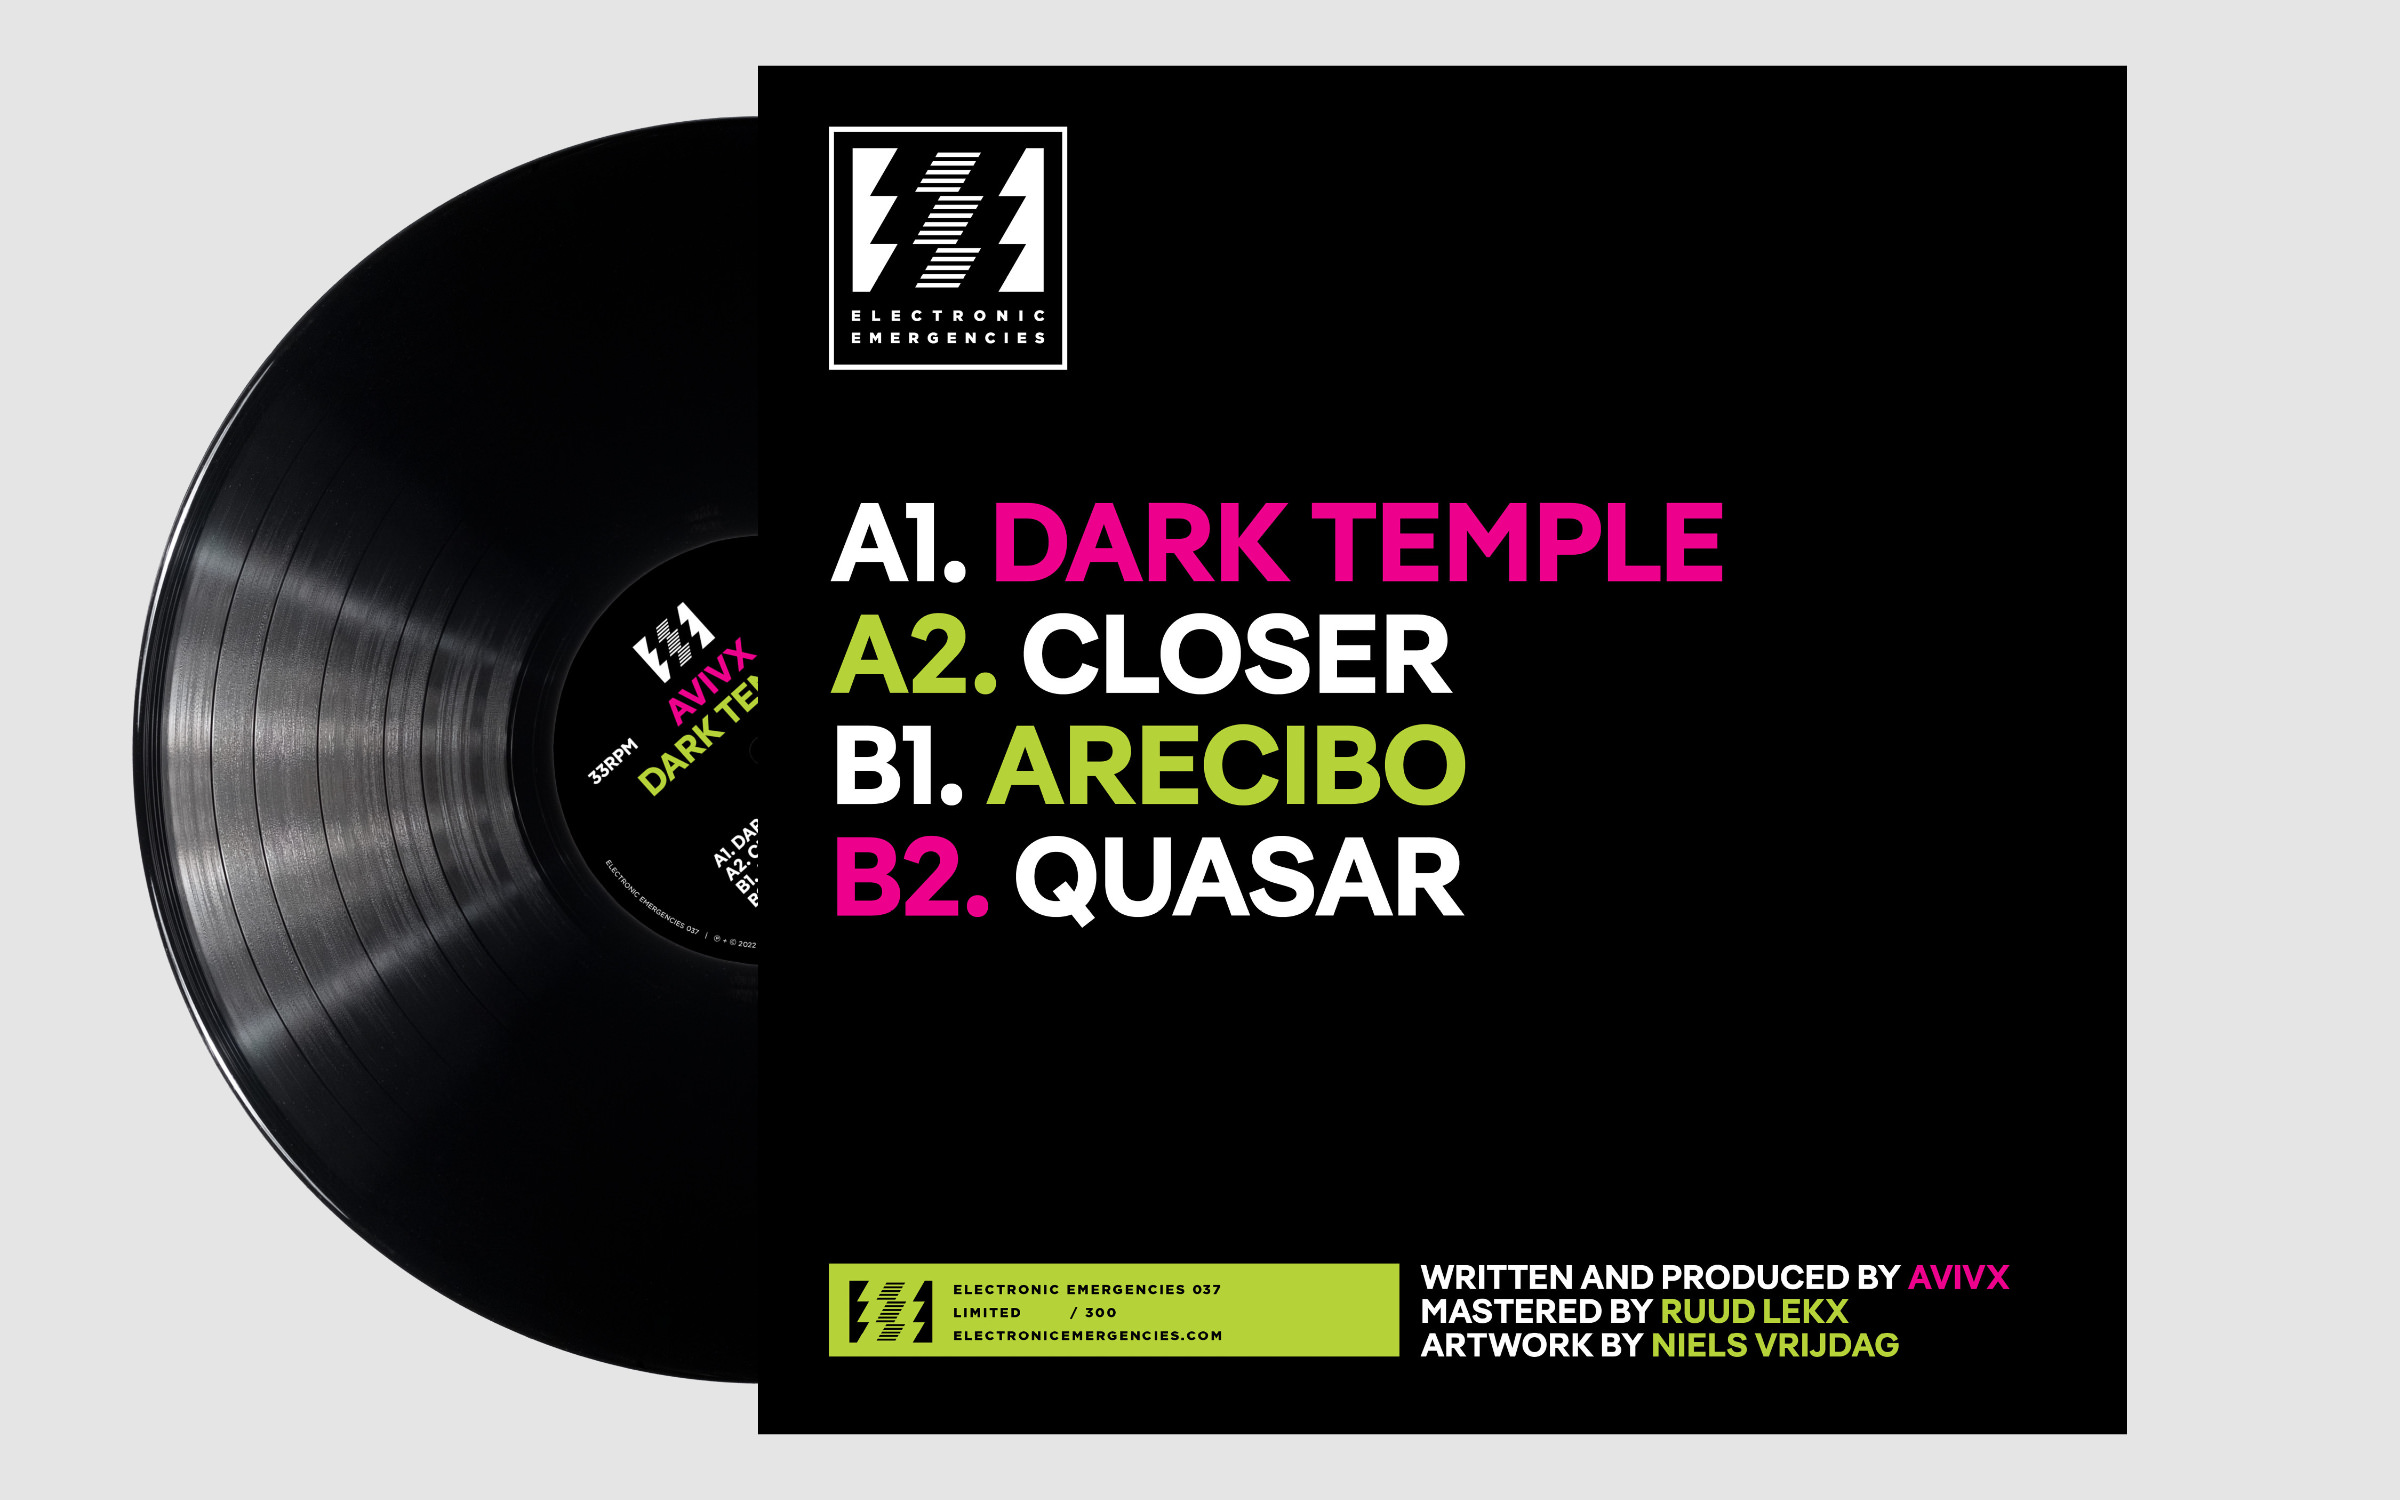 The typeface Pangea in use for DJ AVIVX’s ‘Dark Temple’ 12" EP, a moody, energetic house record.